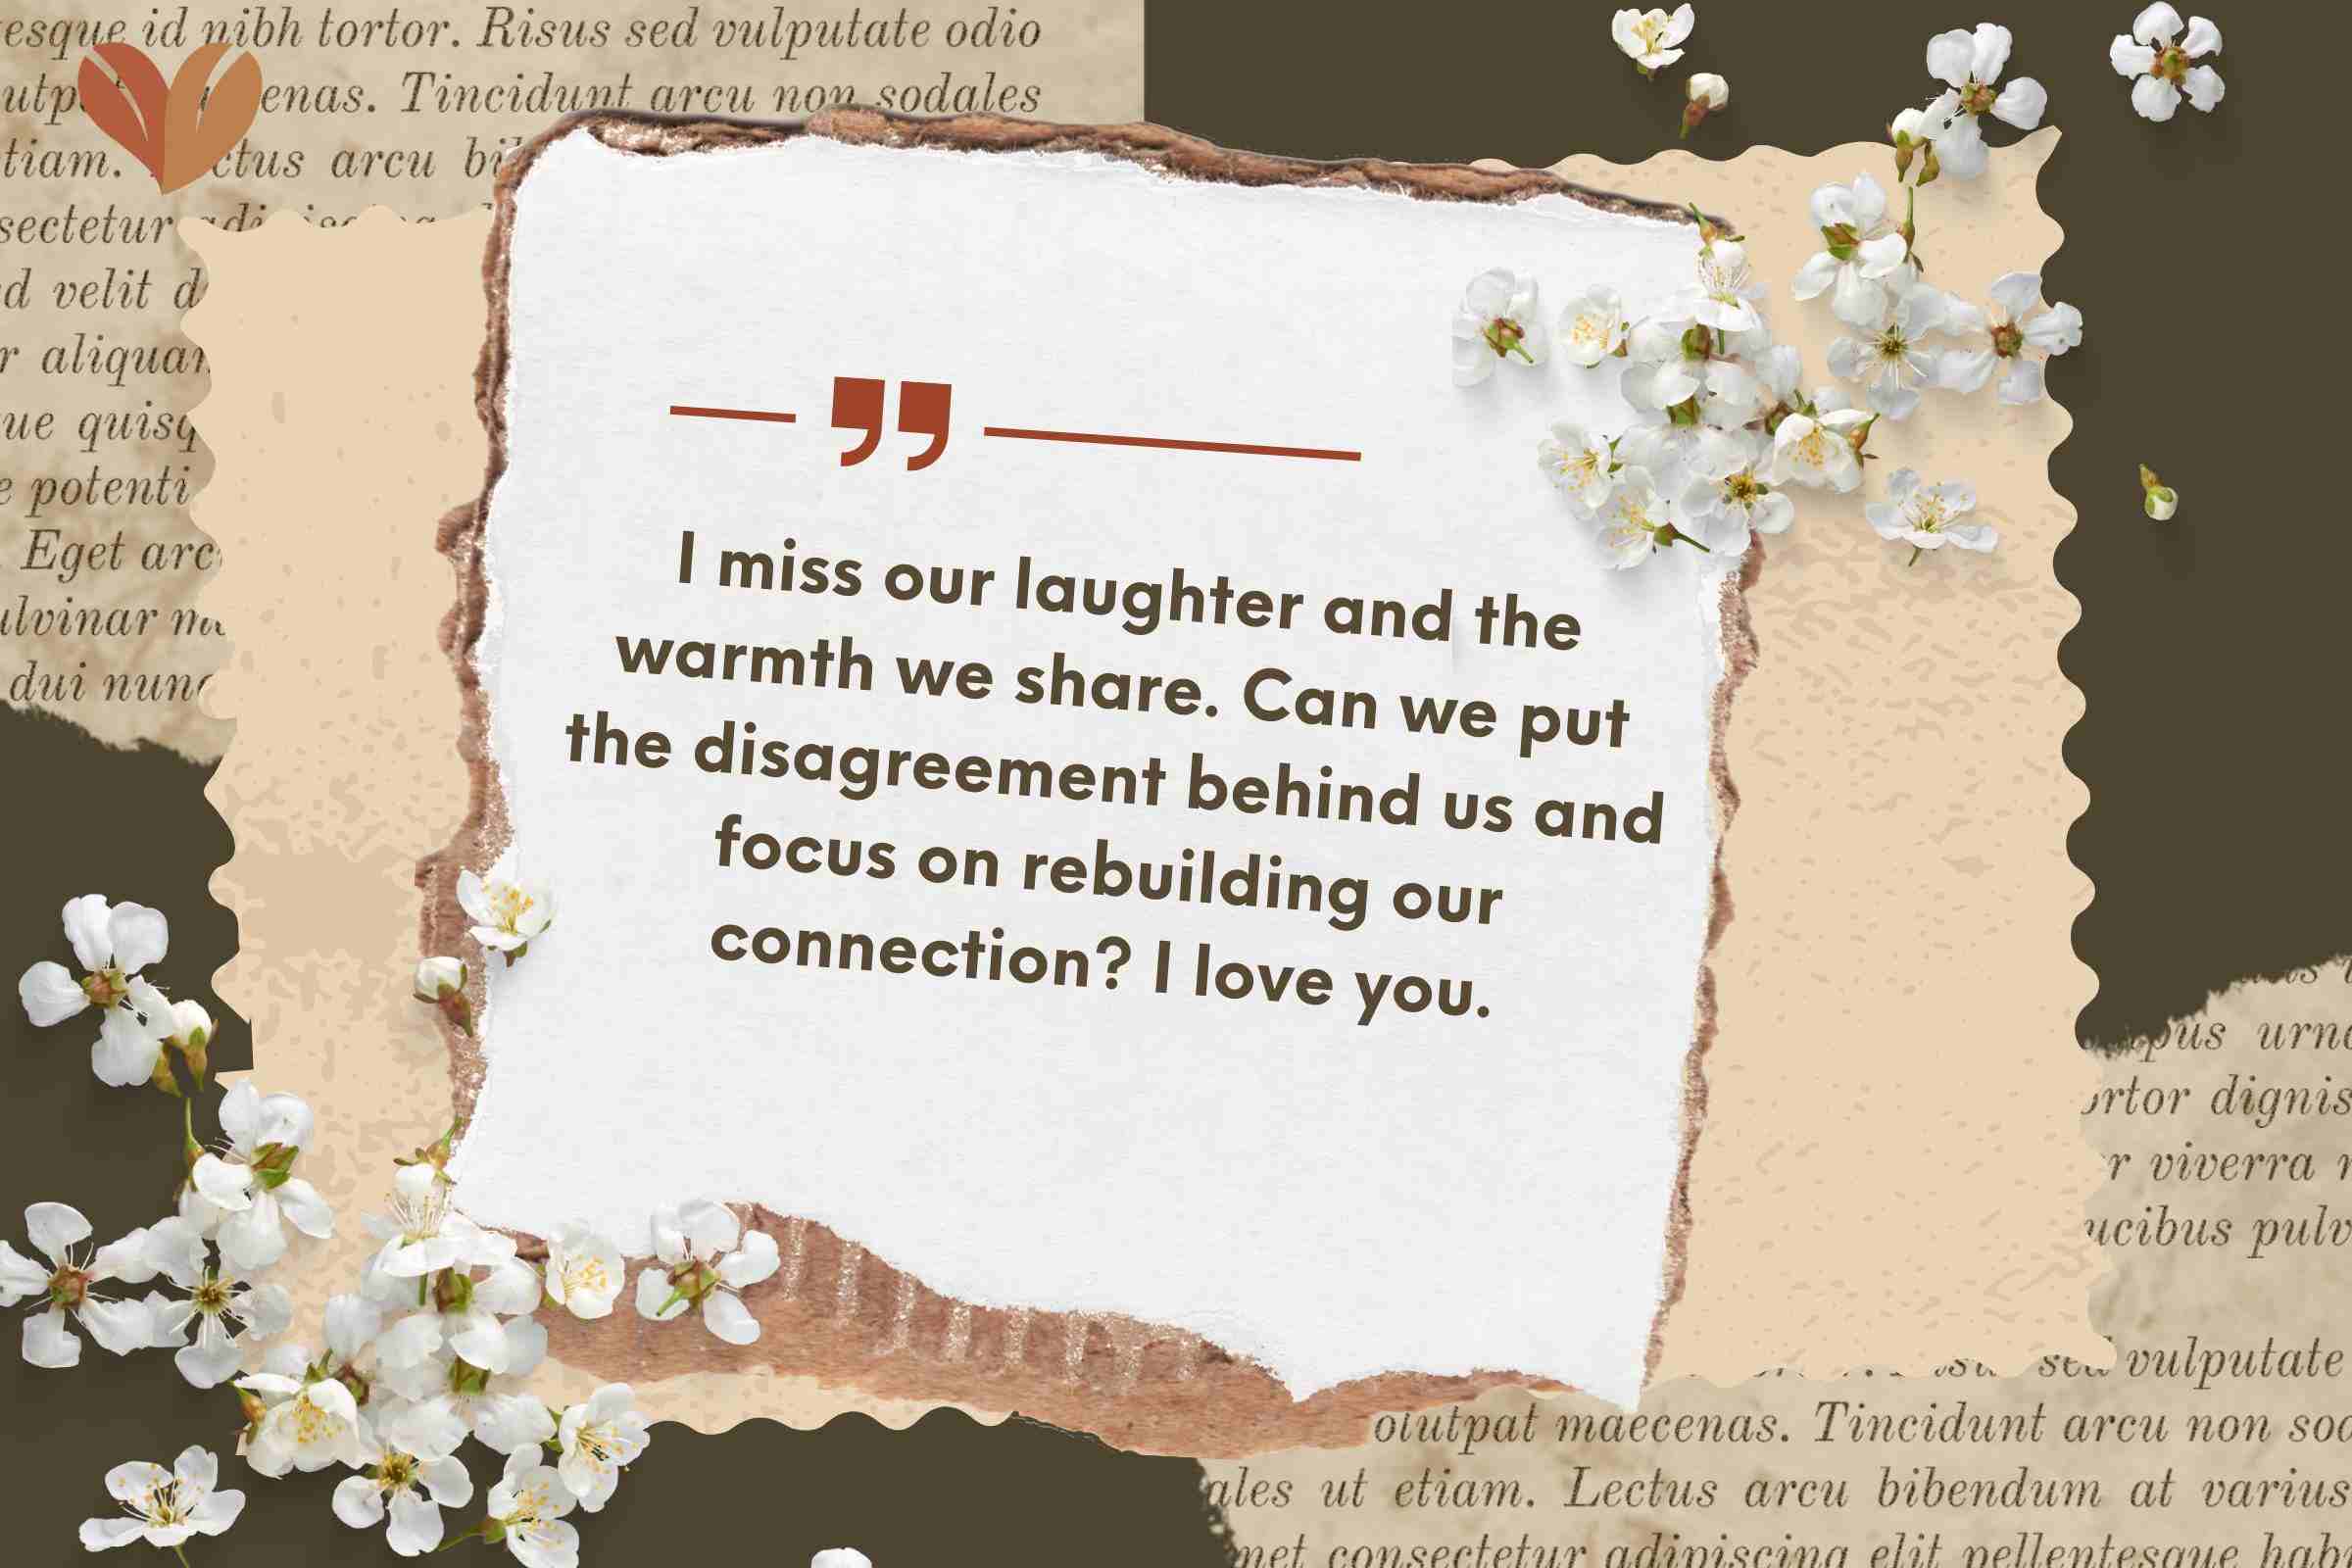 I miss our laughter and the warmth we share. Can we put the disagreement behind us and focus on rebuilding our connection? I love you - hot messages for fiance.